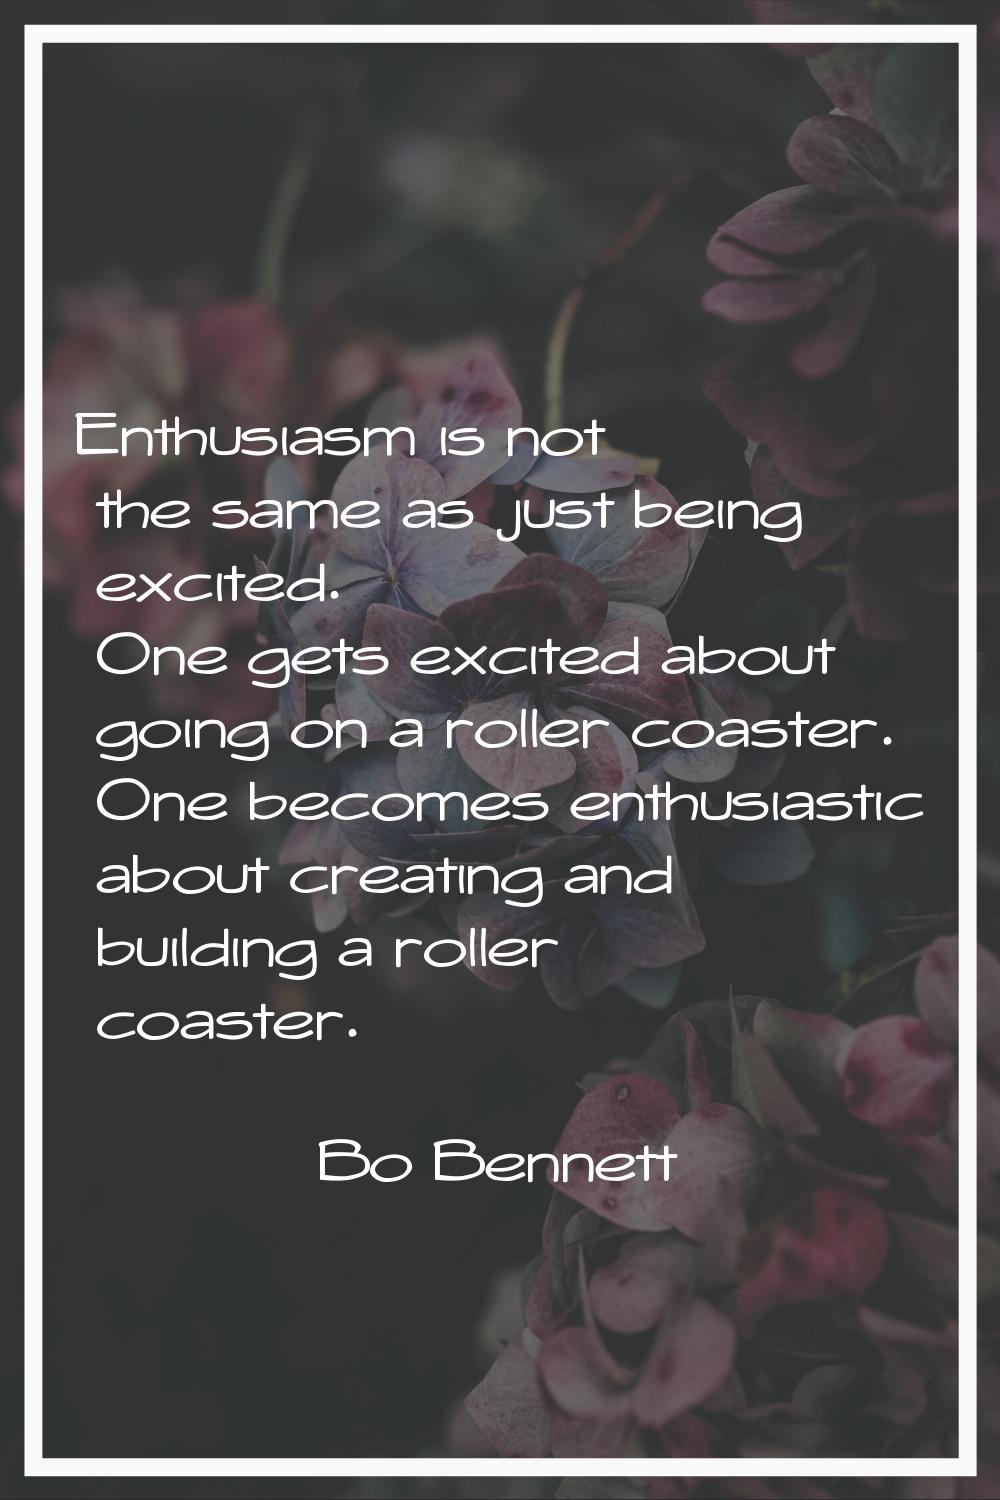 Enthusiasm is not the same as just being excited. One gets excited about going on a roller coaster.